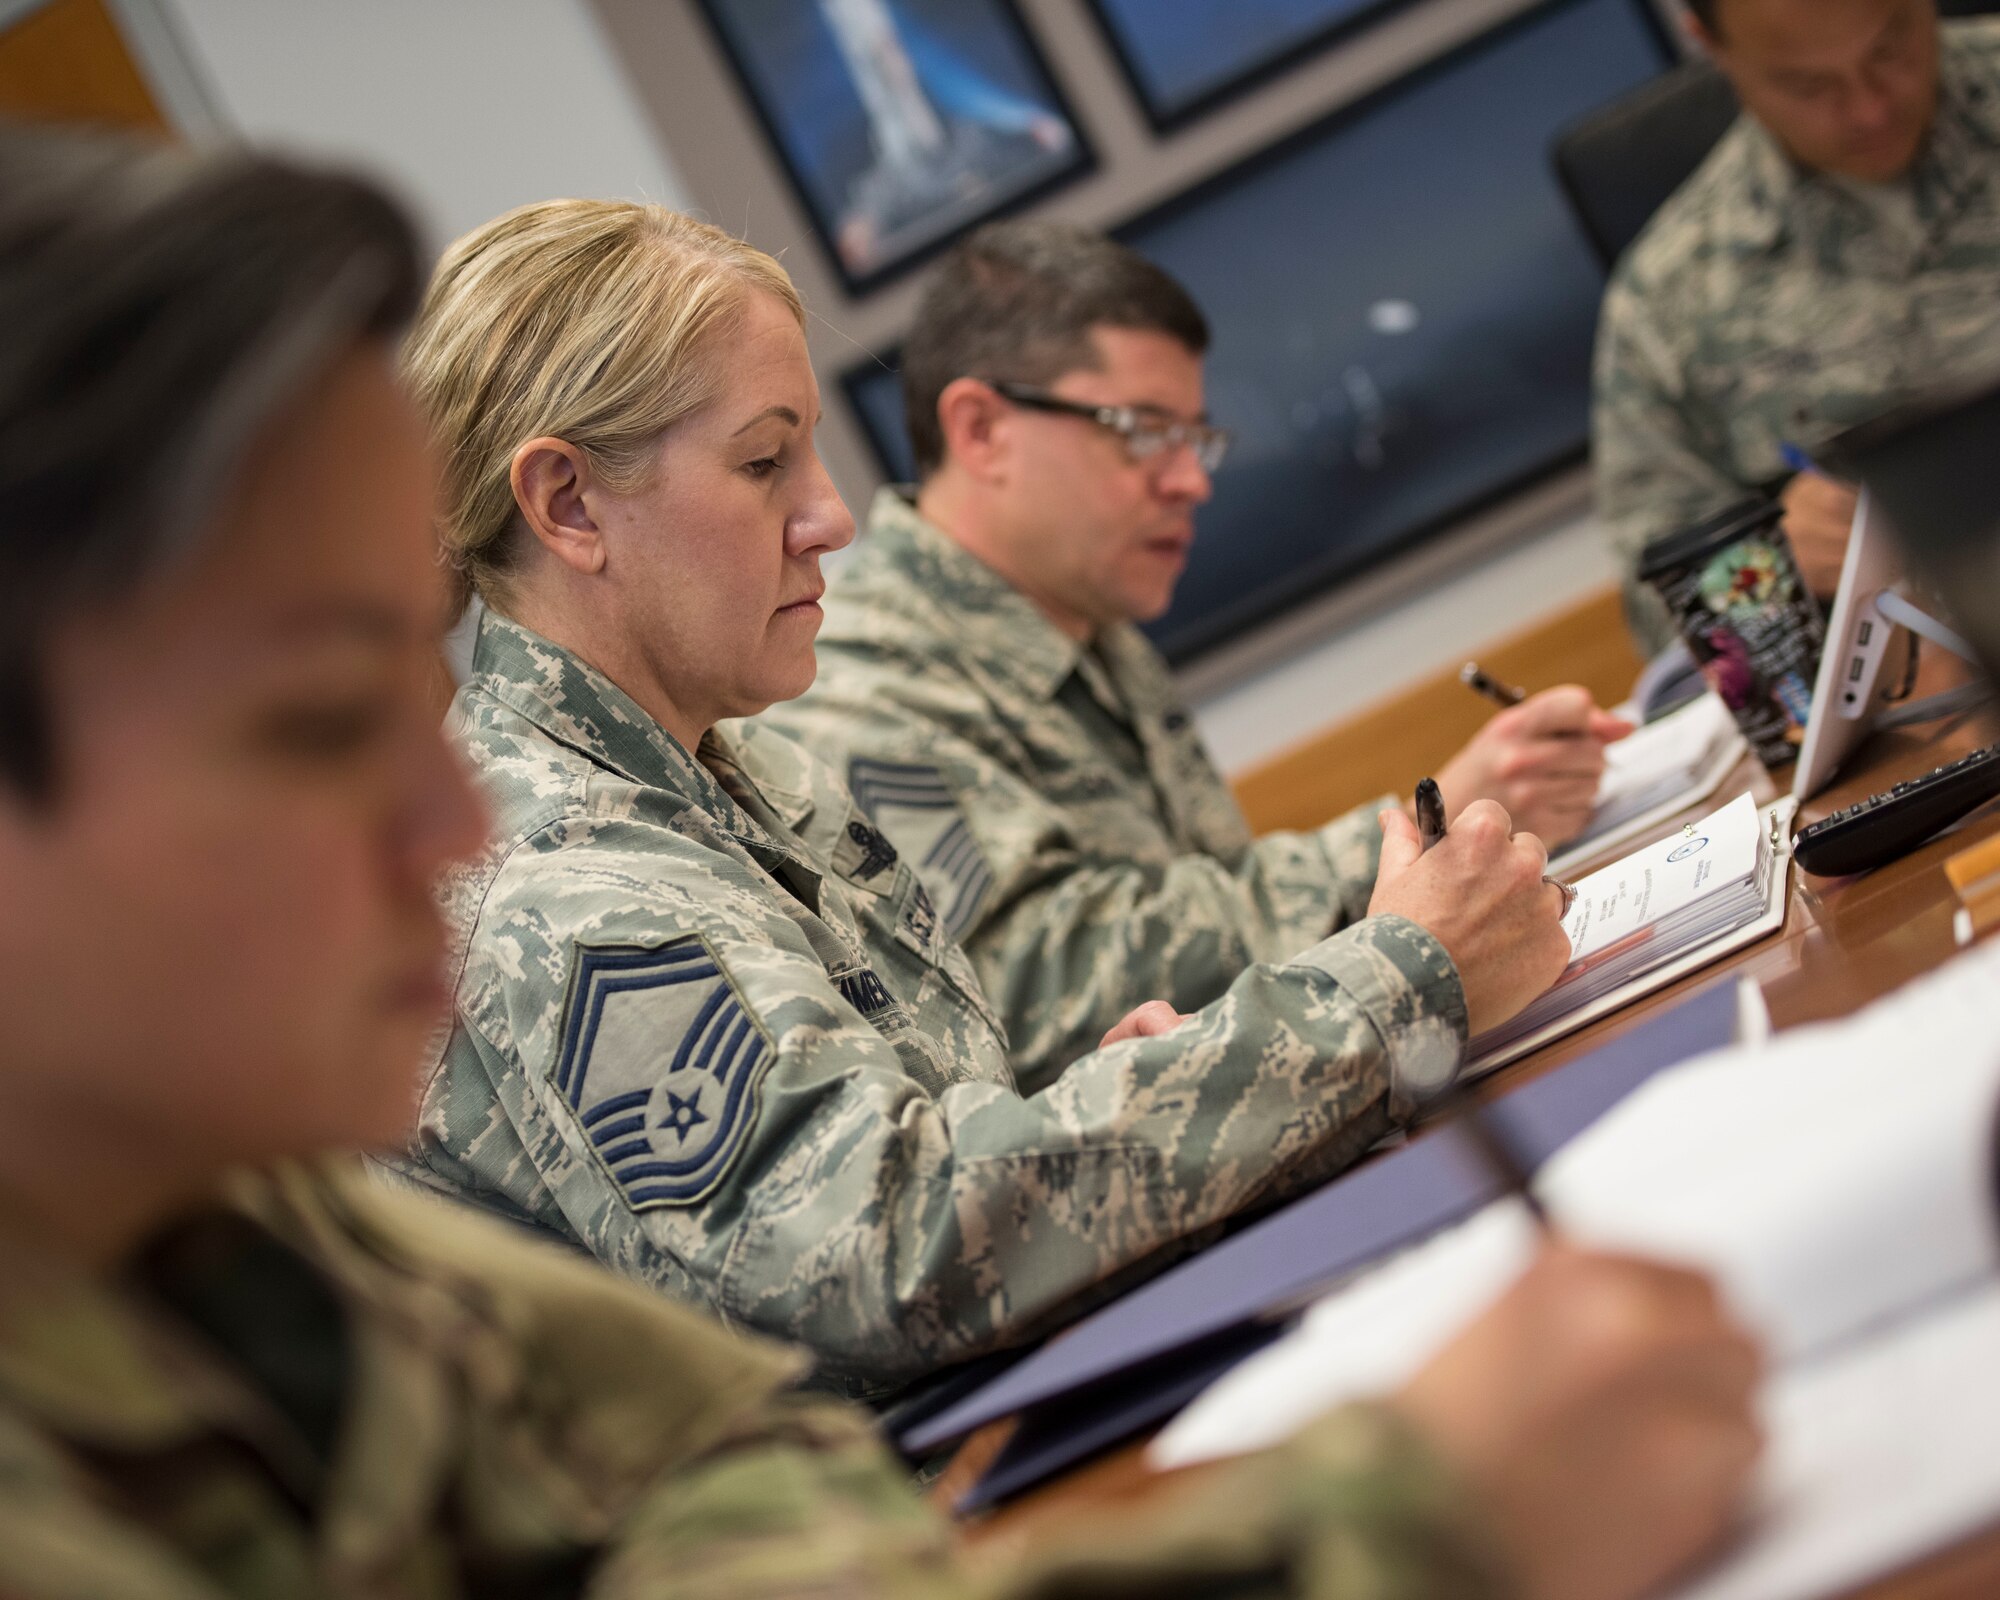 A selection board for the emerging 1C6 Space Warfighter Advanced Instructor Course (AIC) meets at Peterson Air Force Base, Colorado, Nov. 29, 2018.  The group, comprised of representatives of Air Force Space Command and the Air Force Weapons school, chose six enlisted instructors for the course.  Classes are expected to begin in July 2019 at Nellis Air Force Base, Nevada.  (U.S. Air Force photo by Dave Grim)